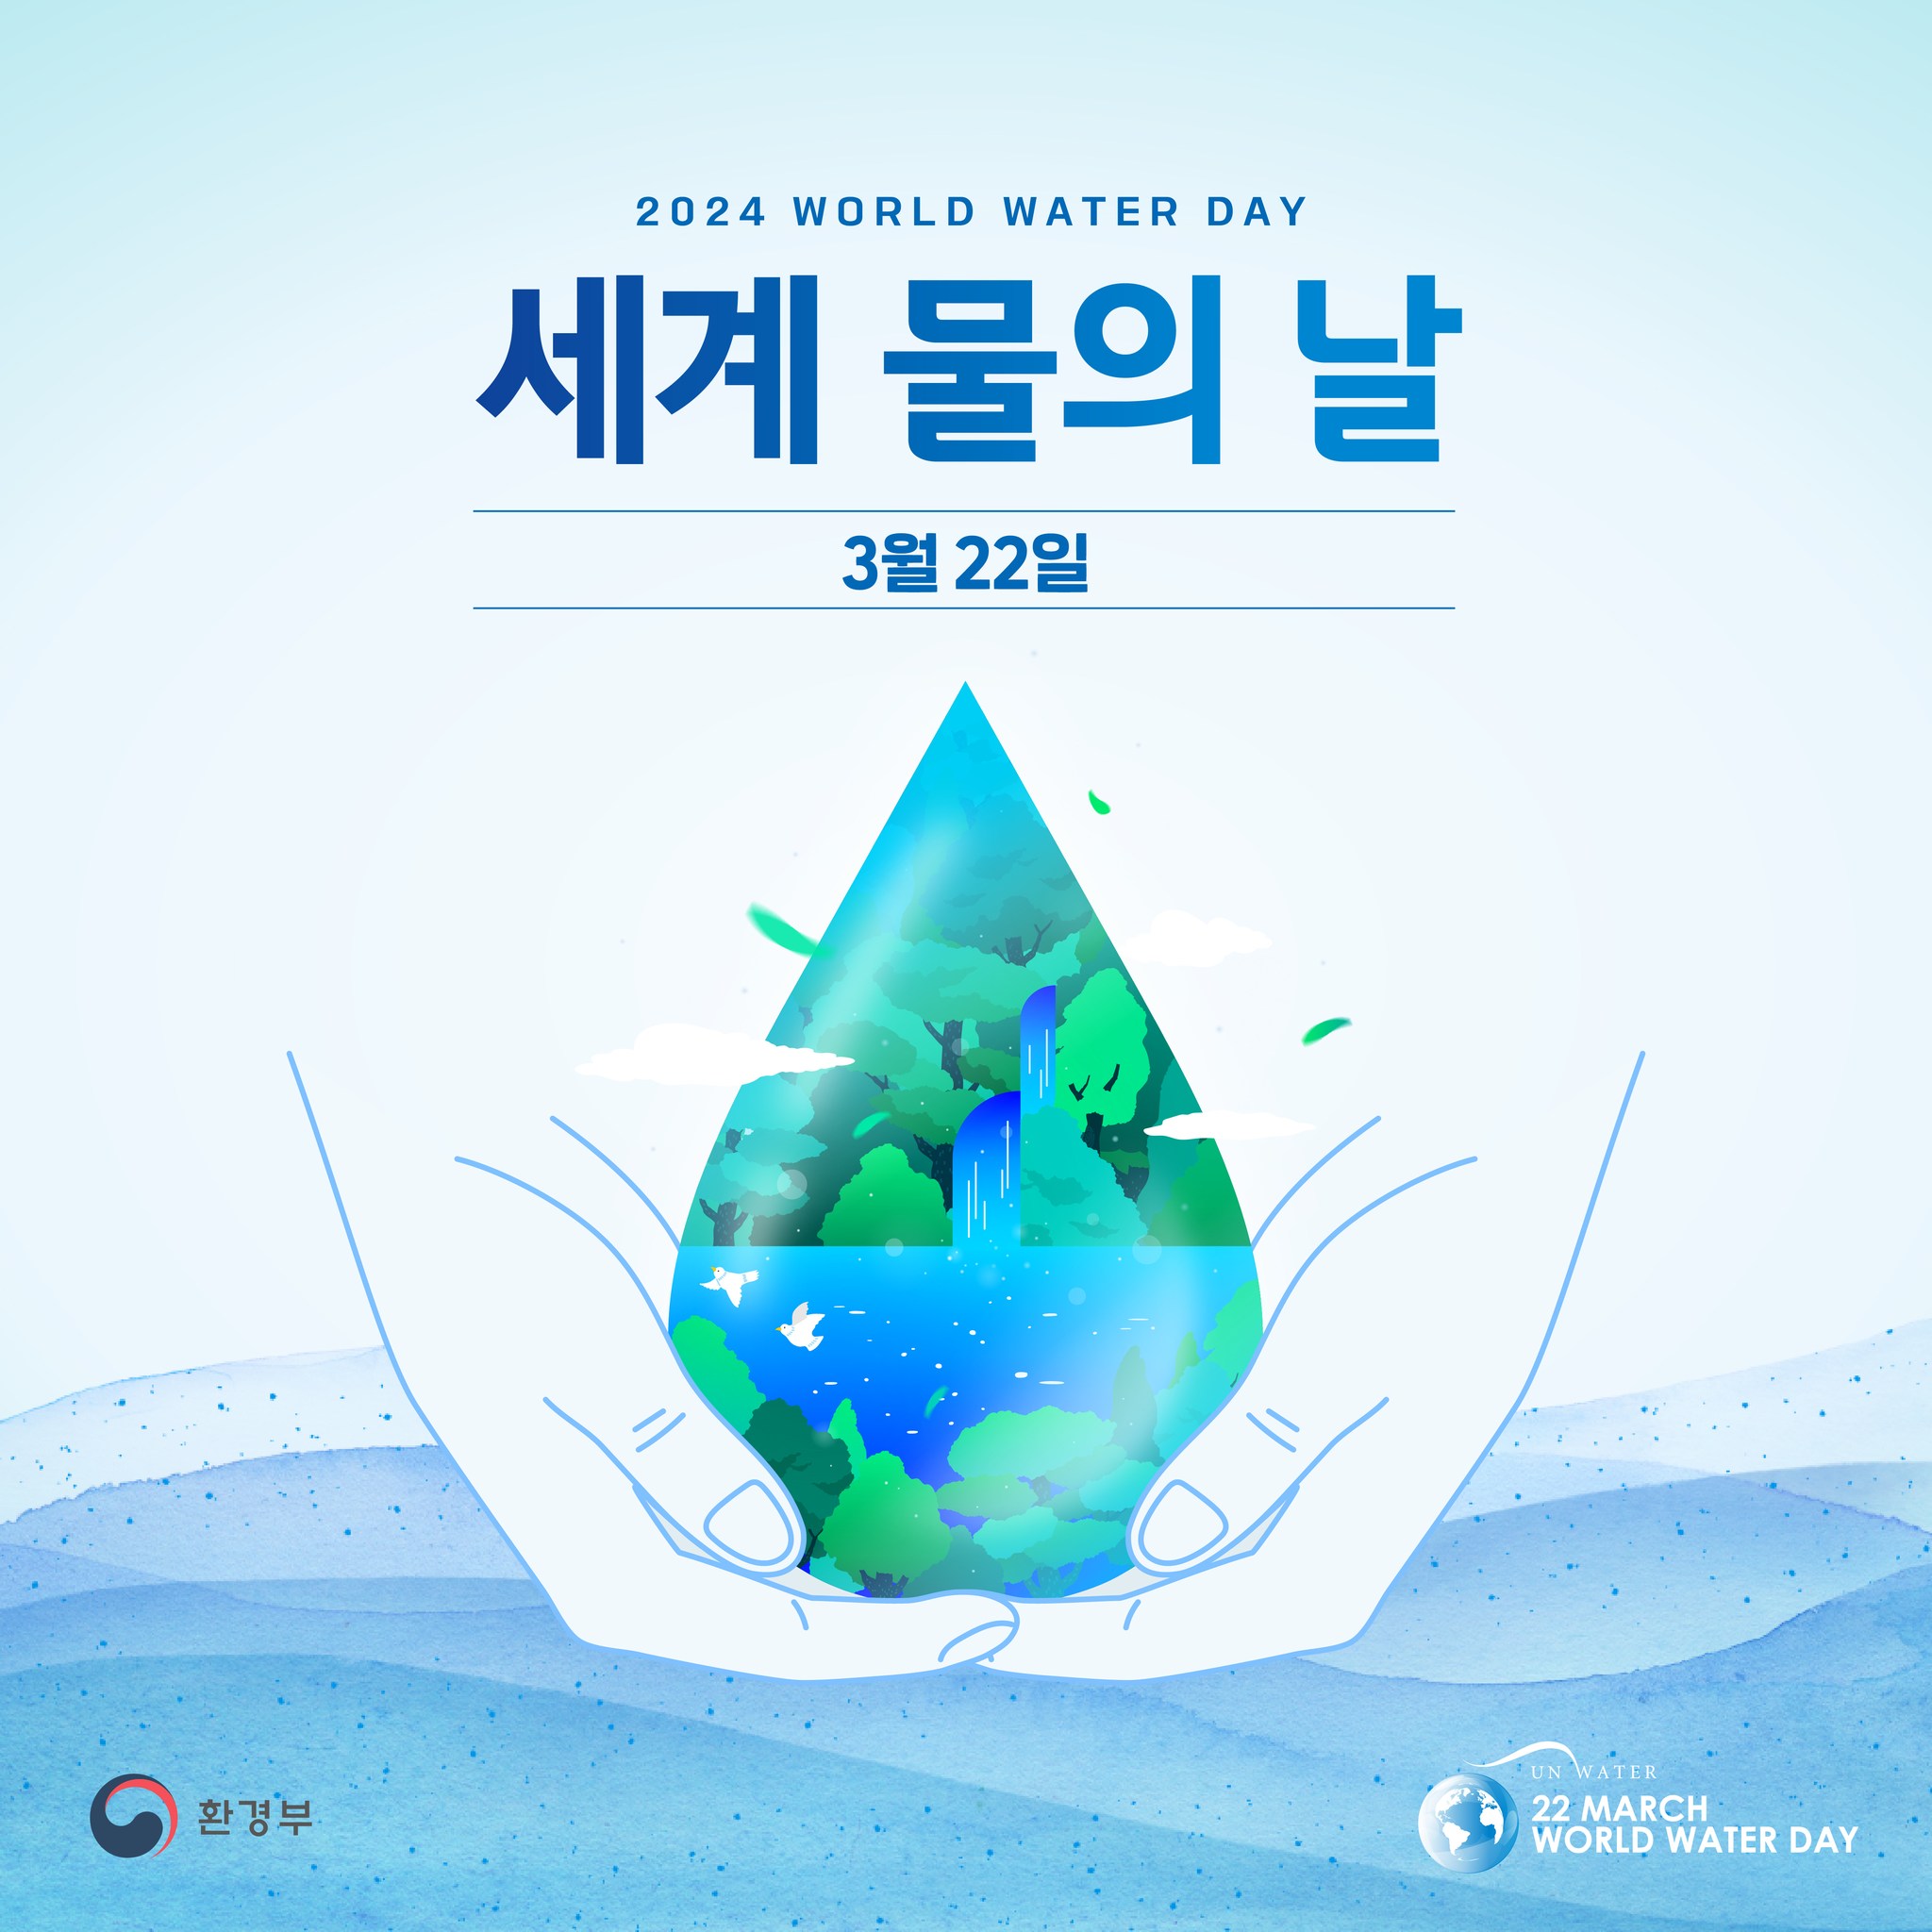 2024 WORLD WATER DAY 세계 물의 날 3월 22일 환경부 UN WATER 22 MARCH WORLD WATER DAY